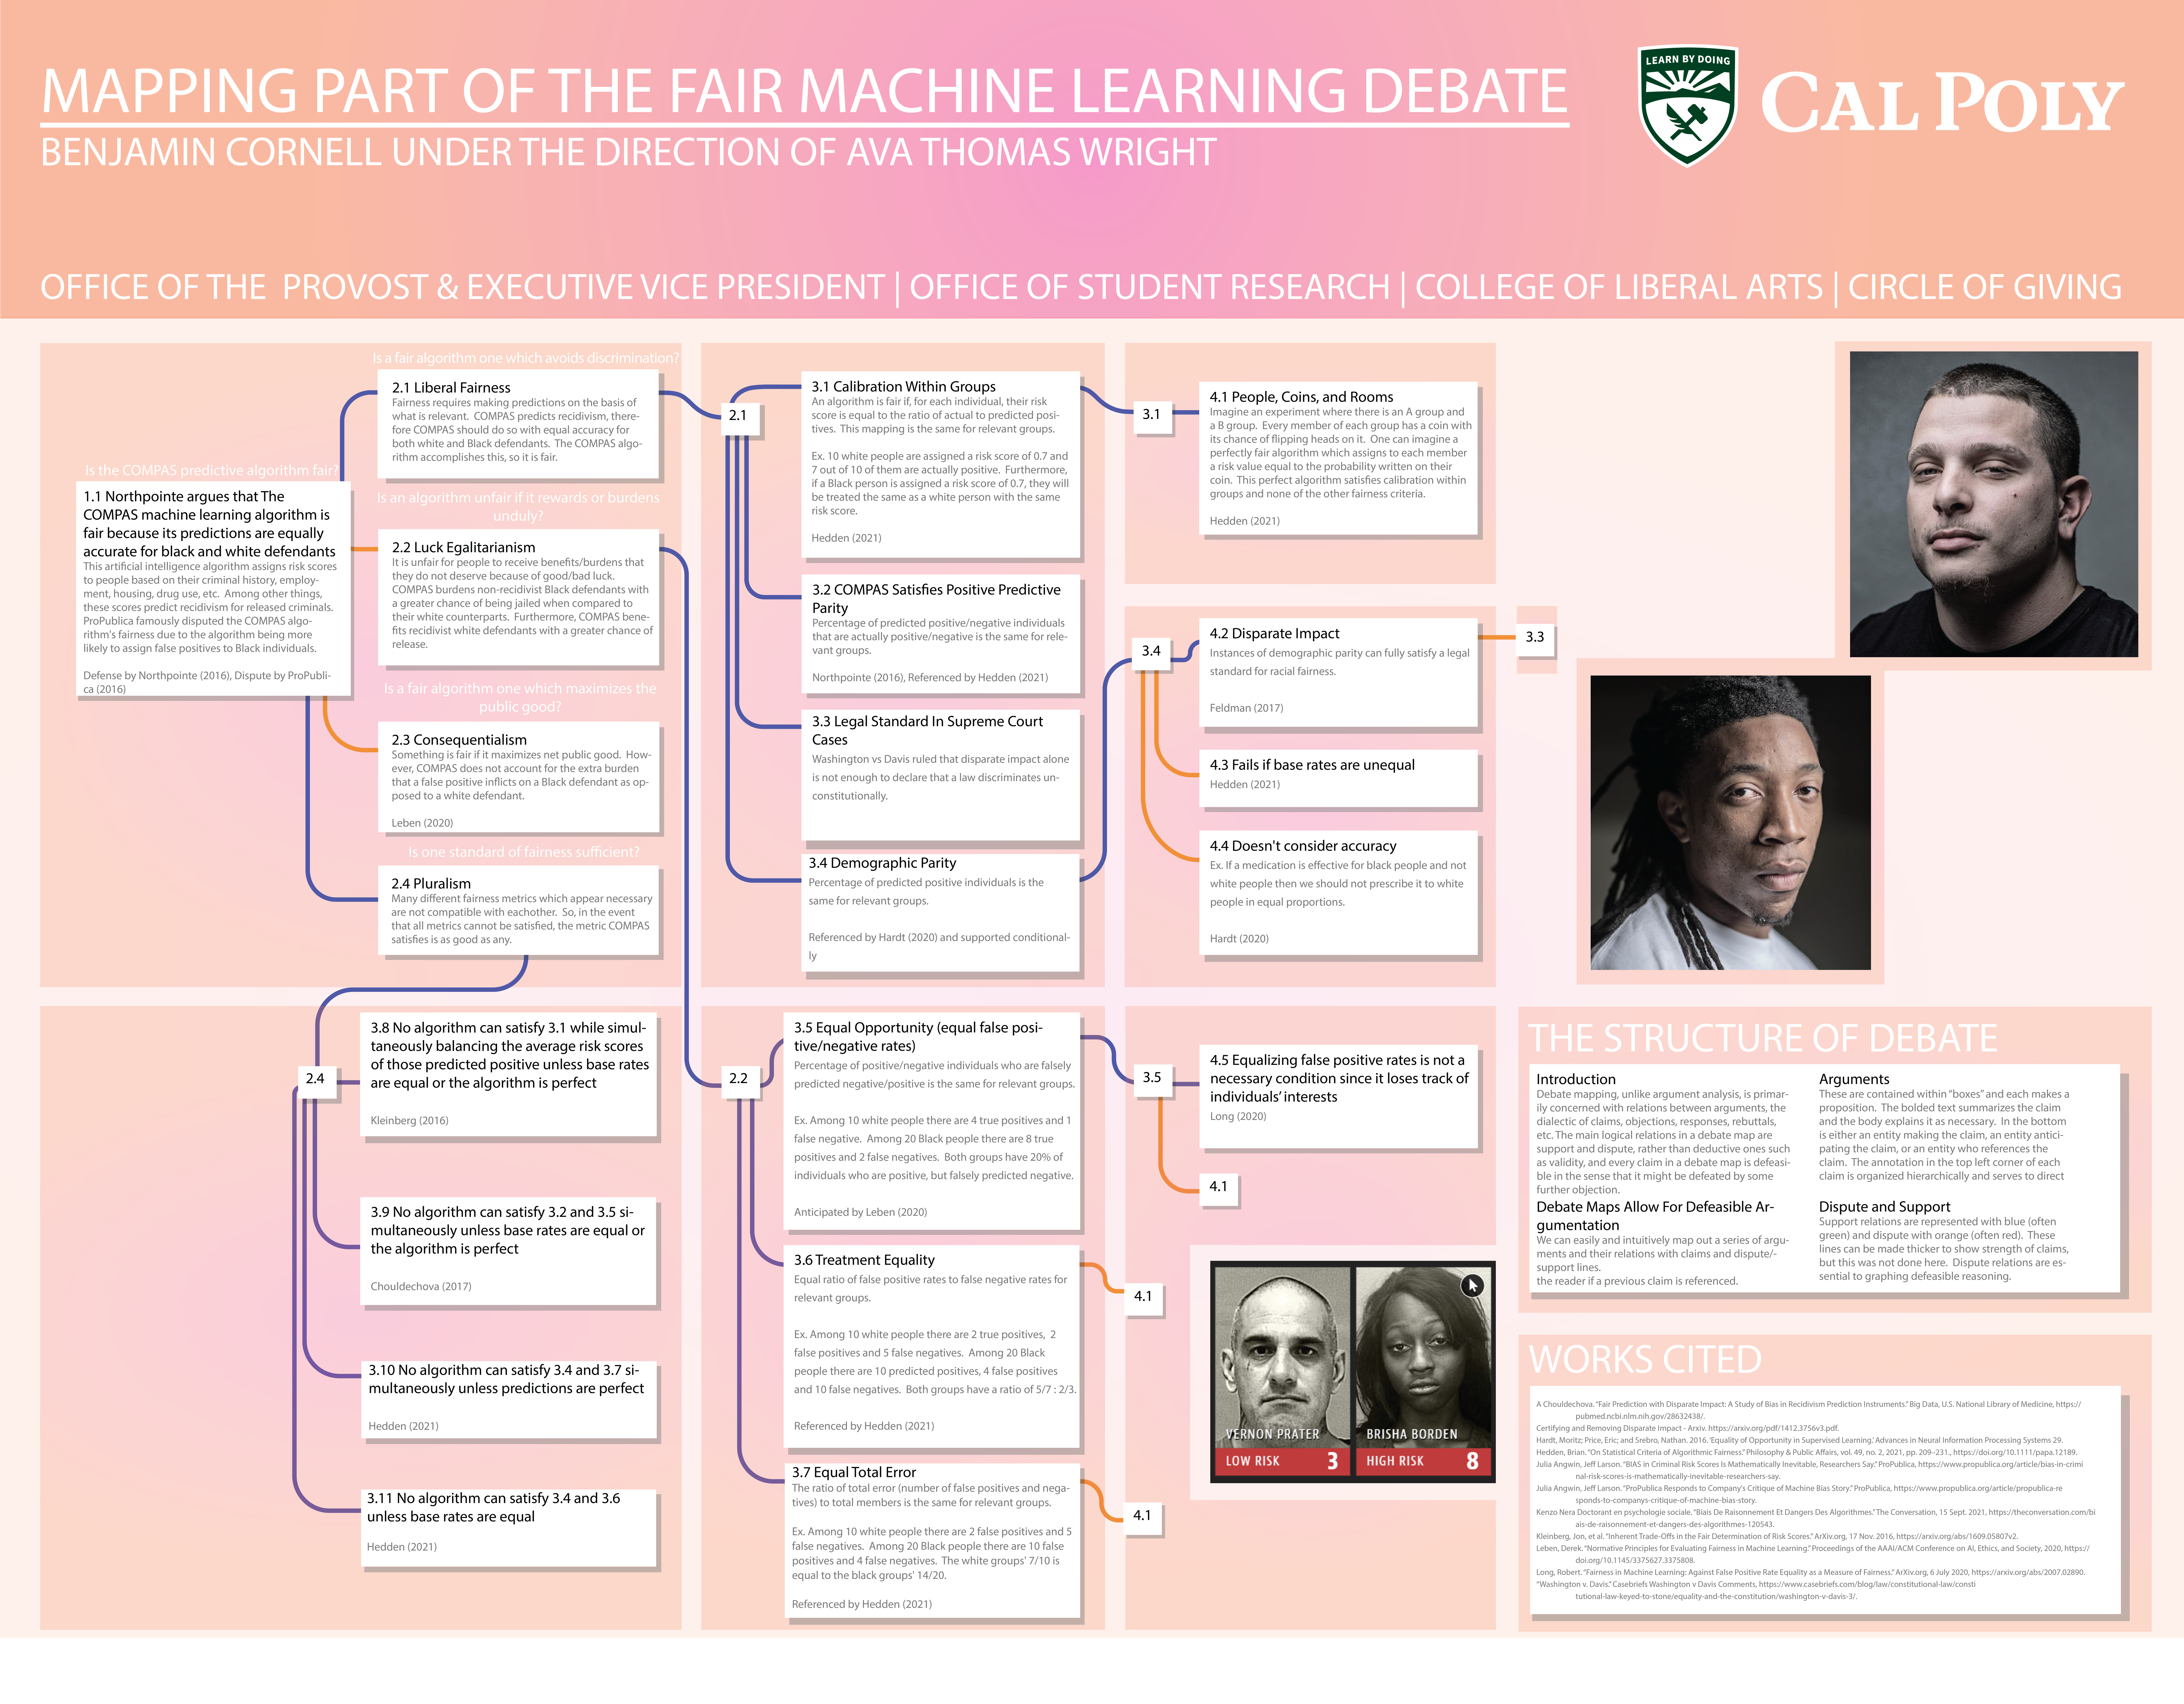 Represents part of the fair machine learning debate map. Download to zoom in and explore.